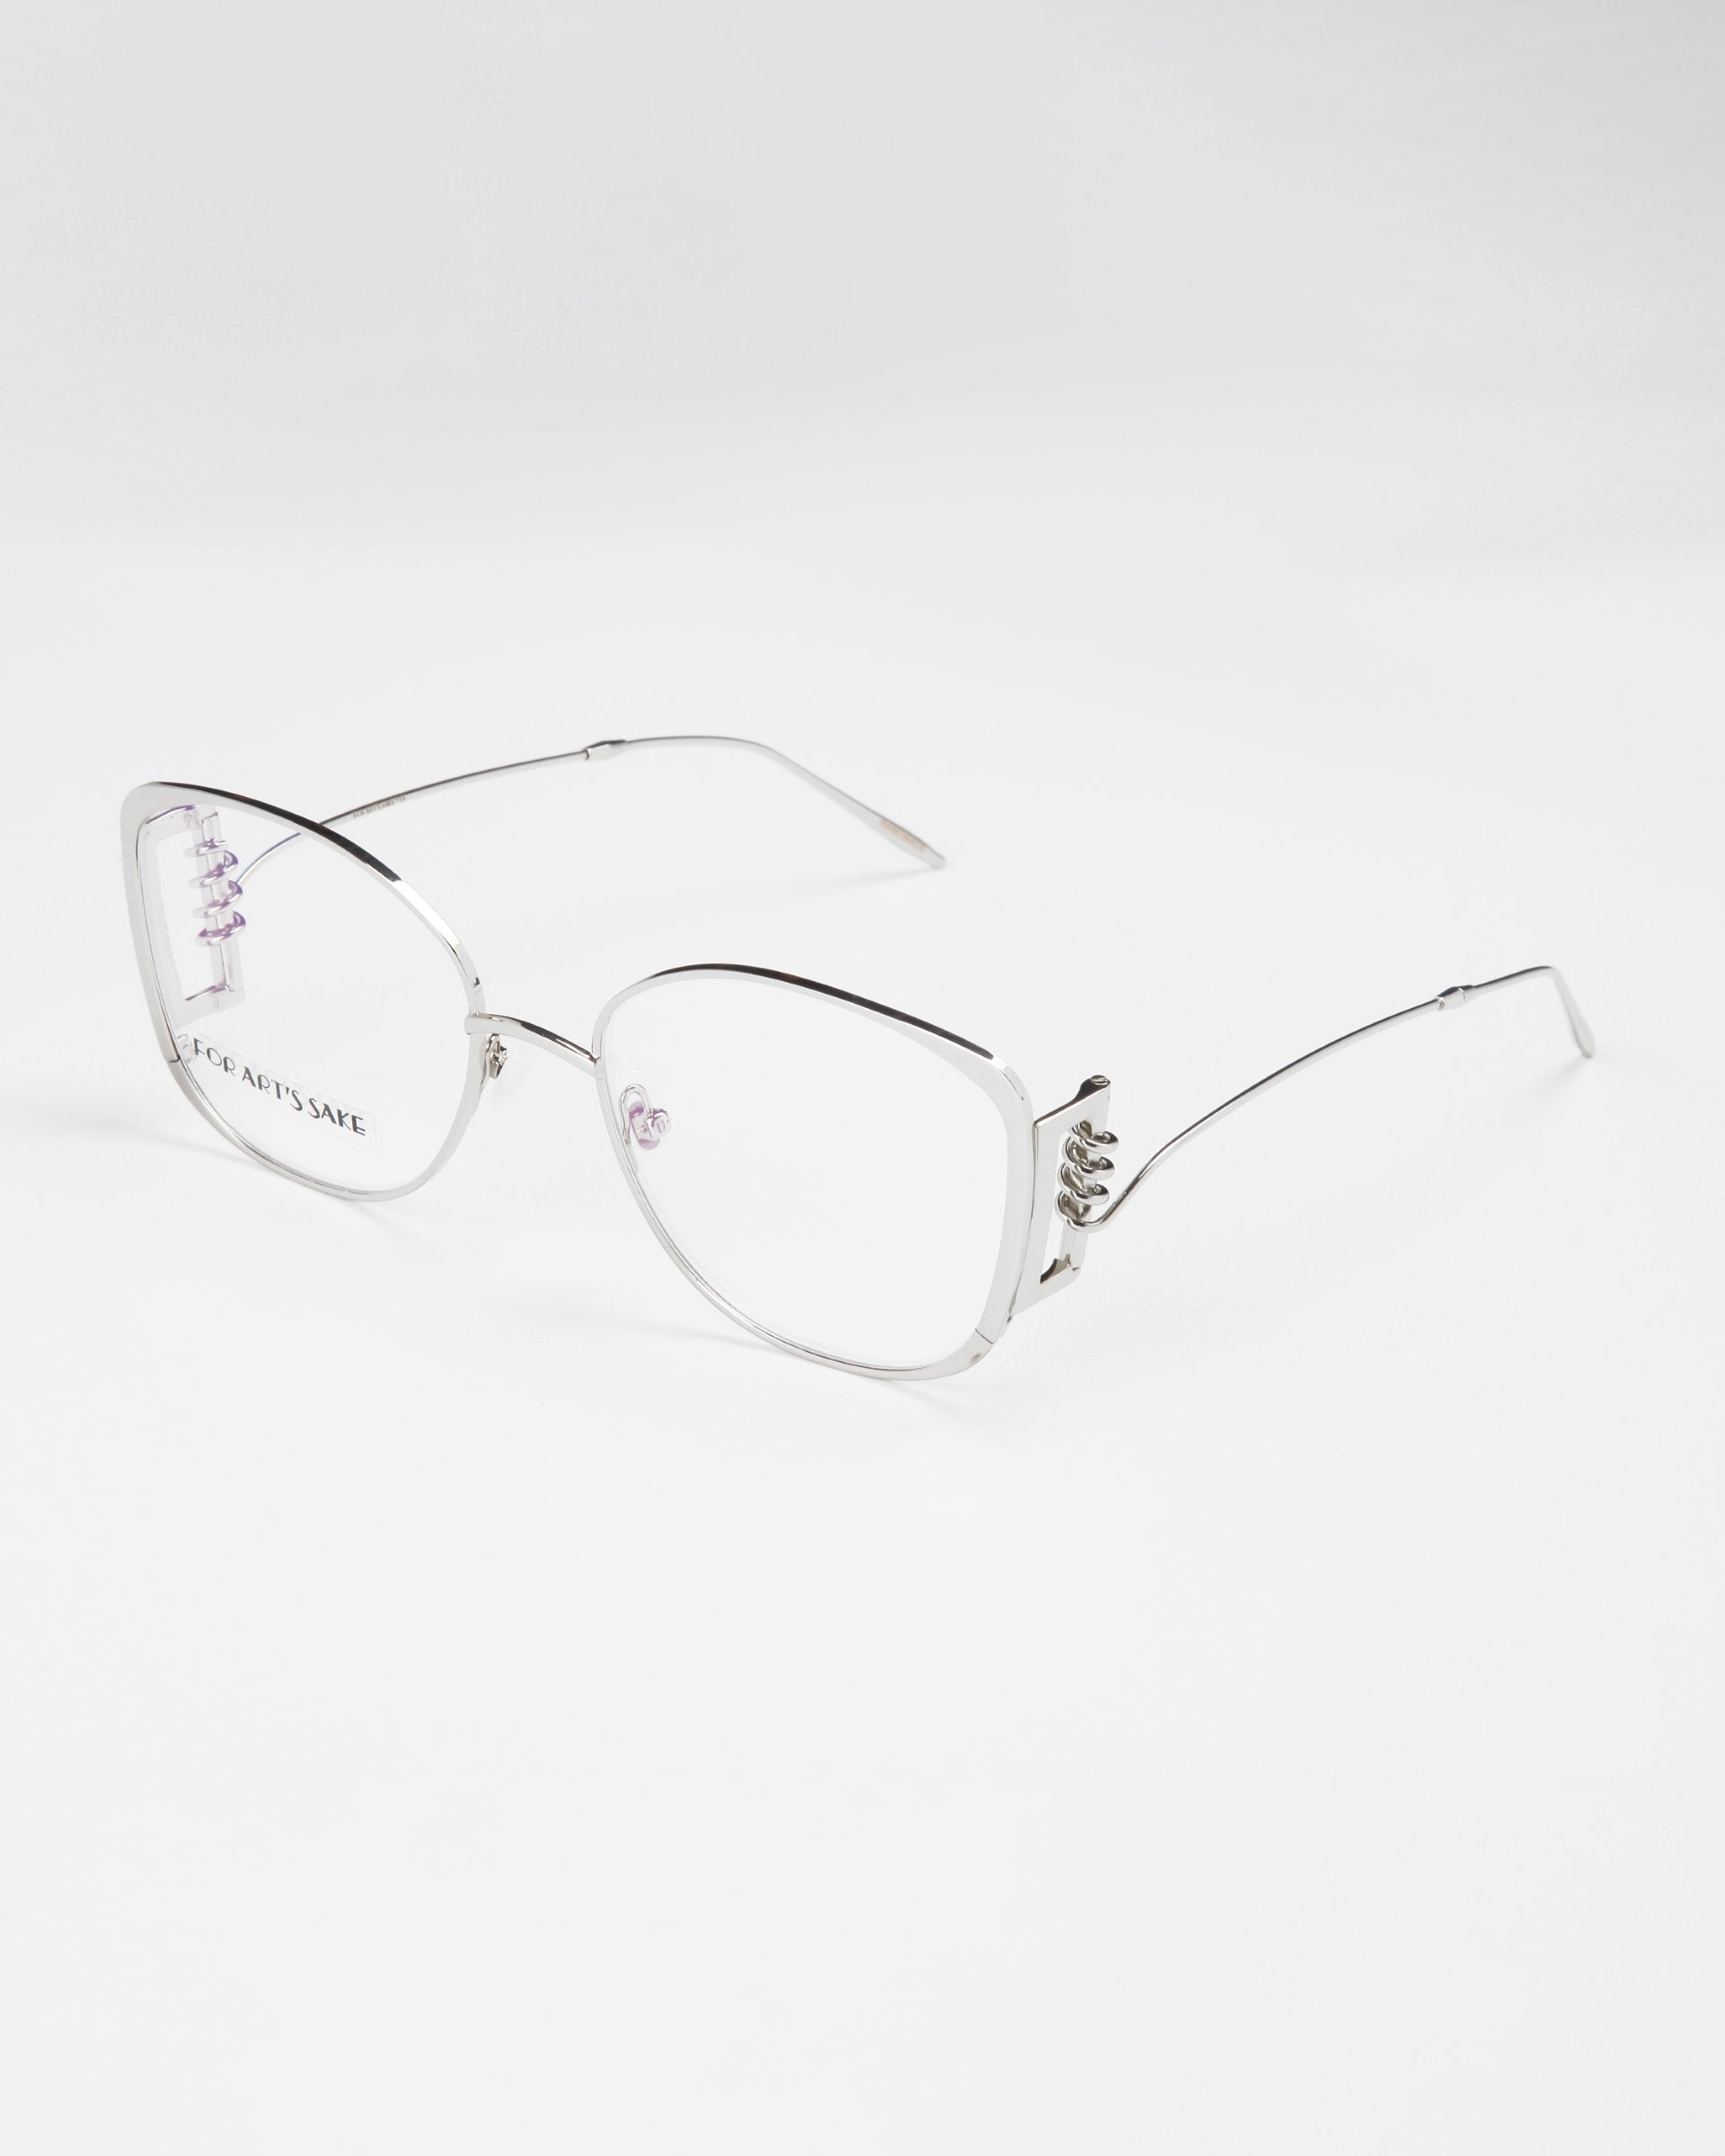 A pair of stylish, silver-framed Jupiter eyeglasses by For Art's Sake® with slightly oversized square lenses on a white background. The temples are thin and straight, with intricate decorative elements near the hinges. These chic glasses also feature a blue light filter for added comfort during screen time.